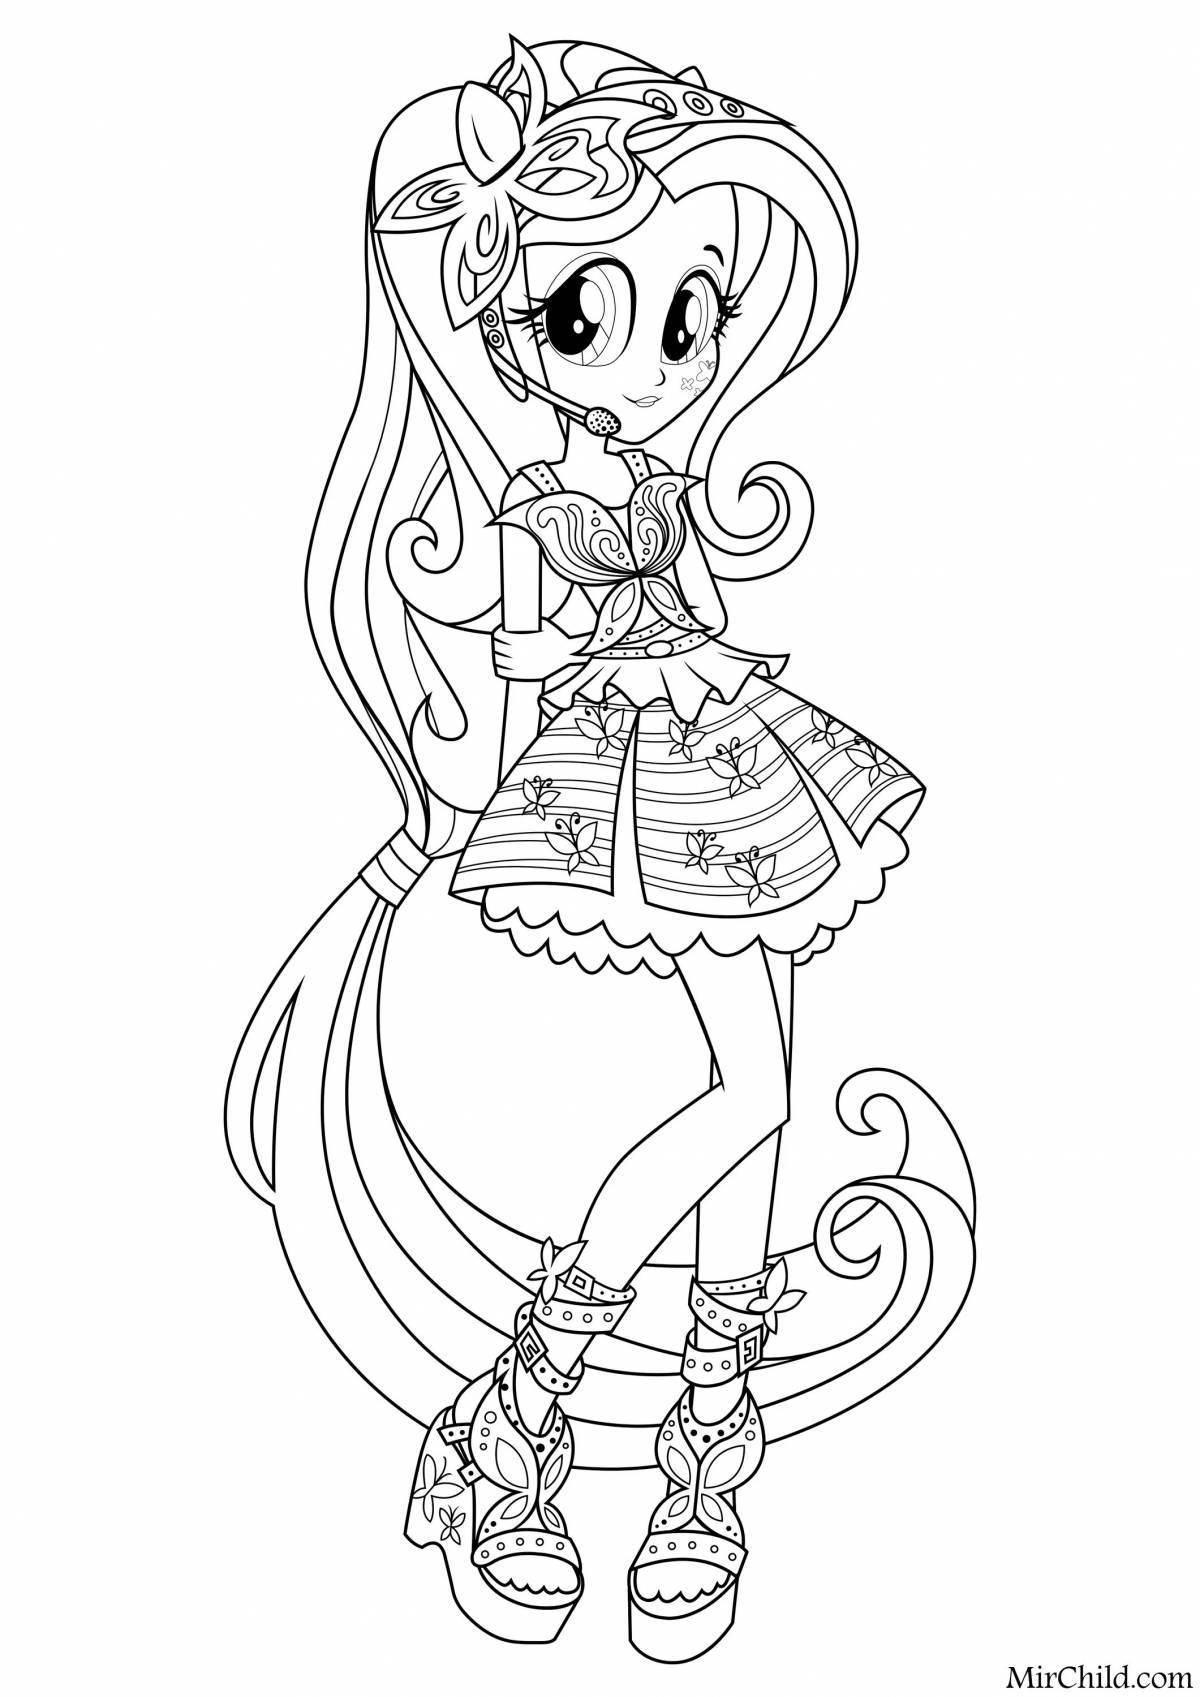 Fluttershy's mesmerizing coloring book